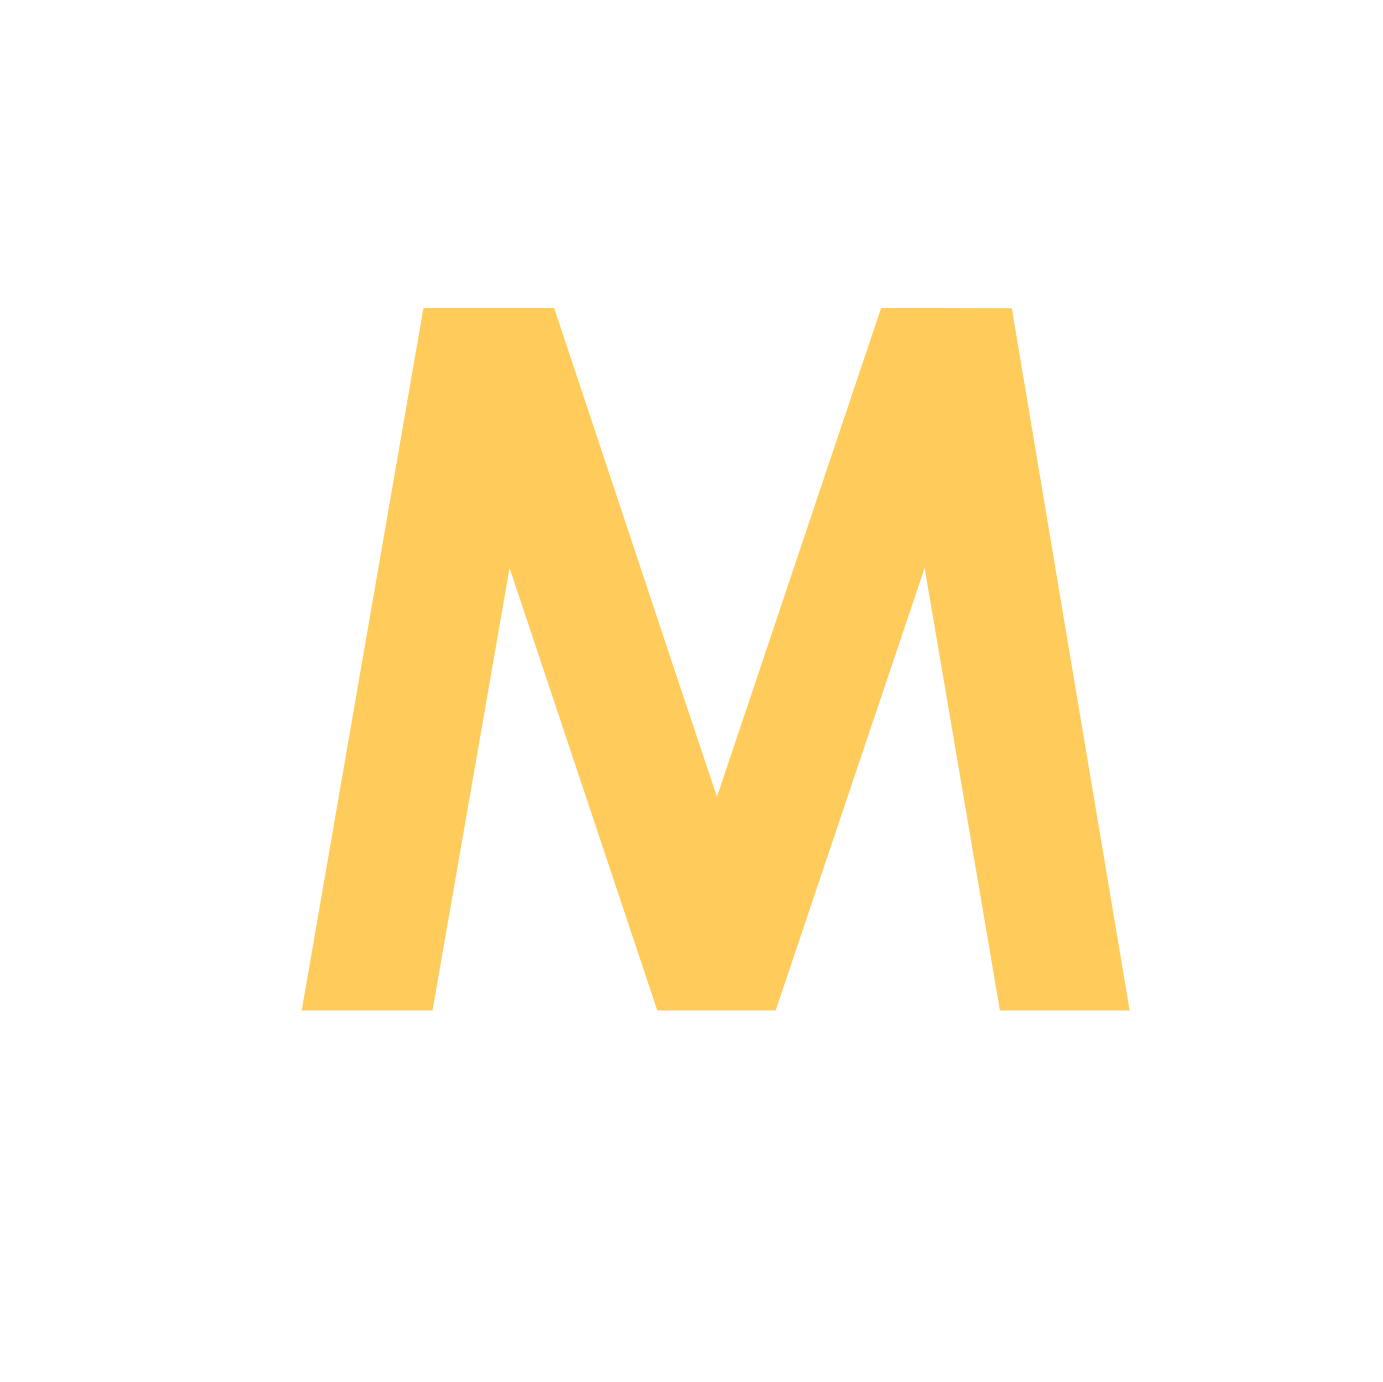 Metalla Royalty & Streaming logo for dark backgrounds (transparent PNG)